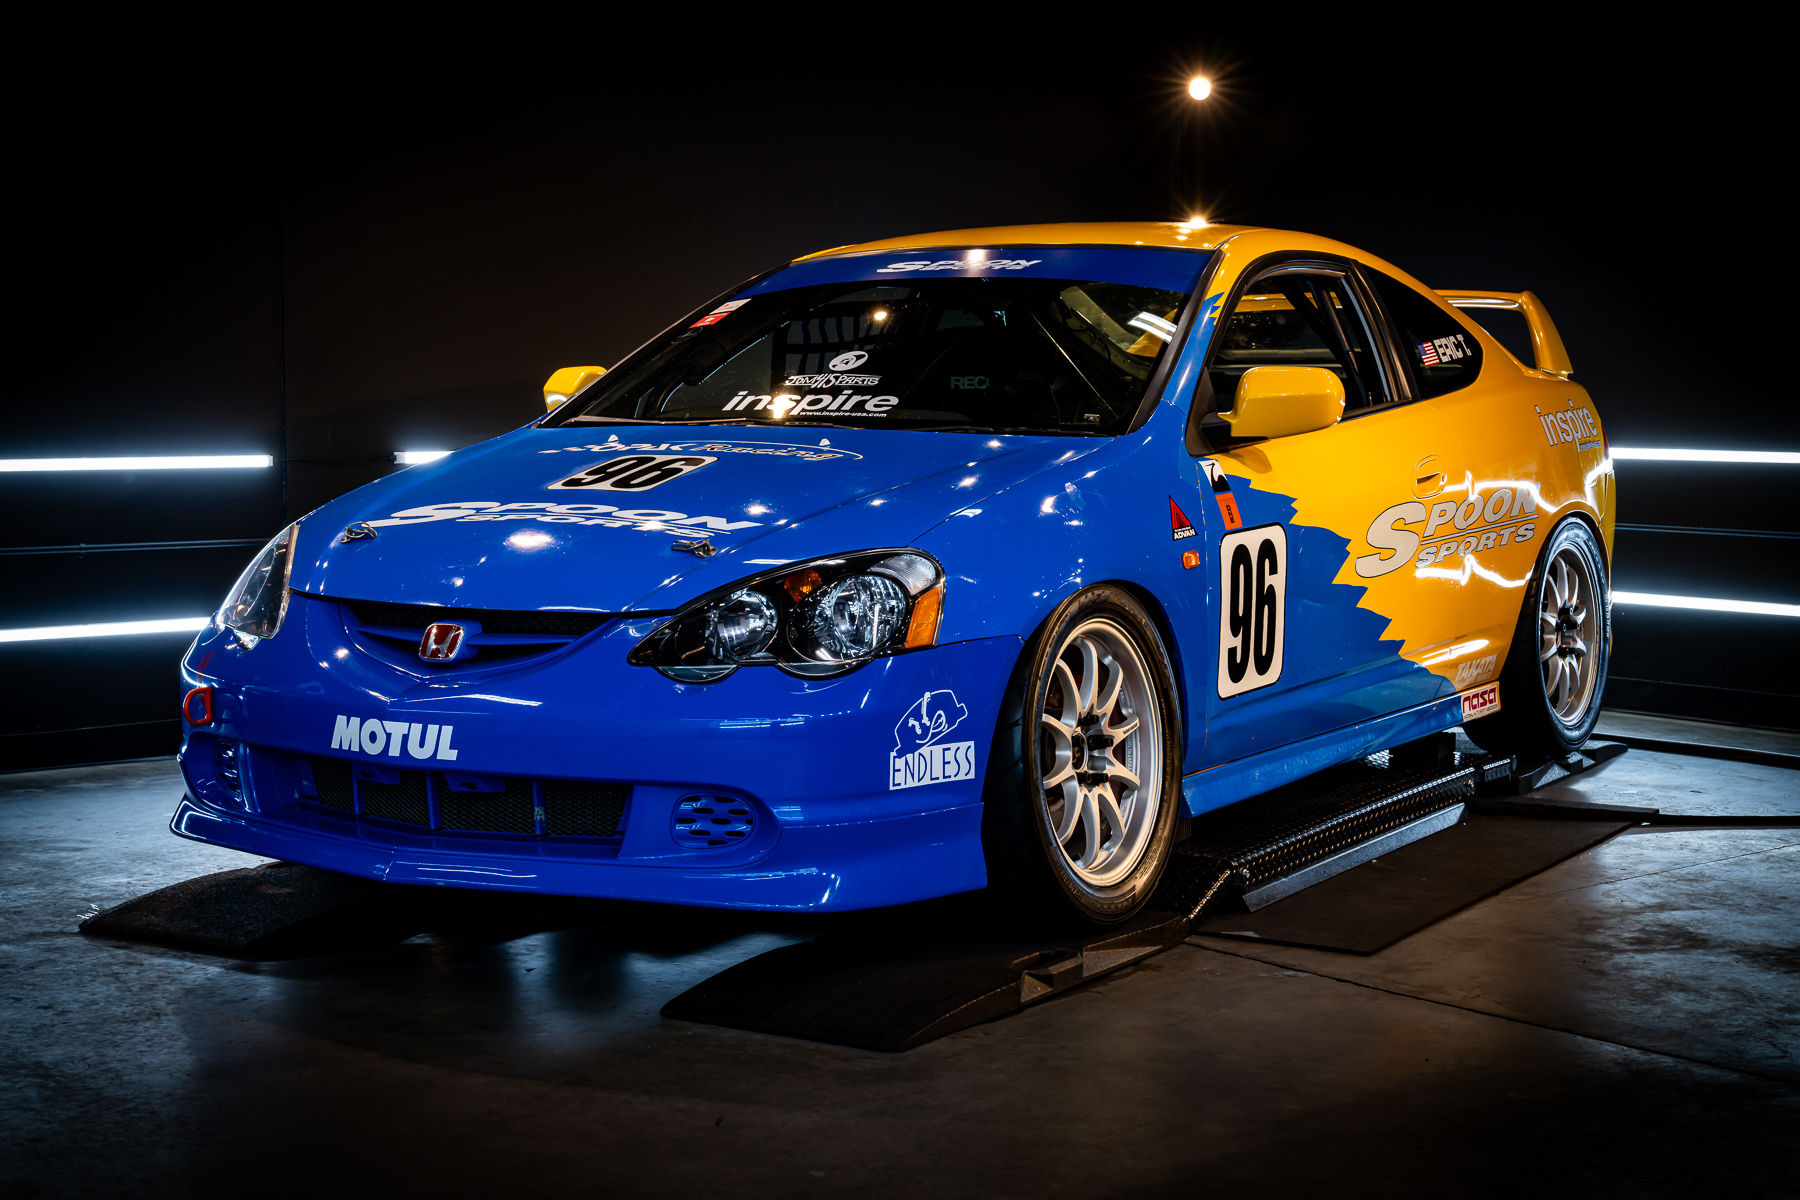 Spoon Race Car - Honda DC5 Integra Type R - Inspire USA - After Dry Ice Detailing, Paint correction and Kamikaze Collection overcoat sealant